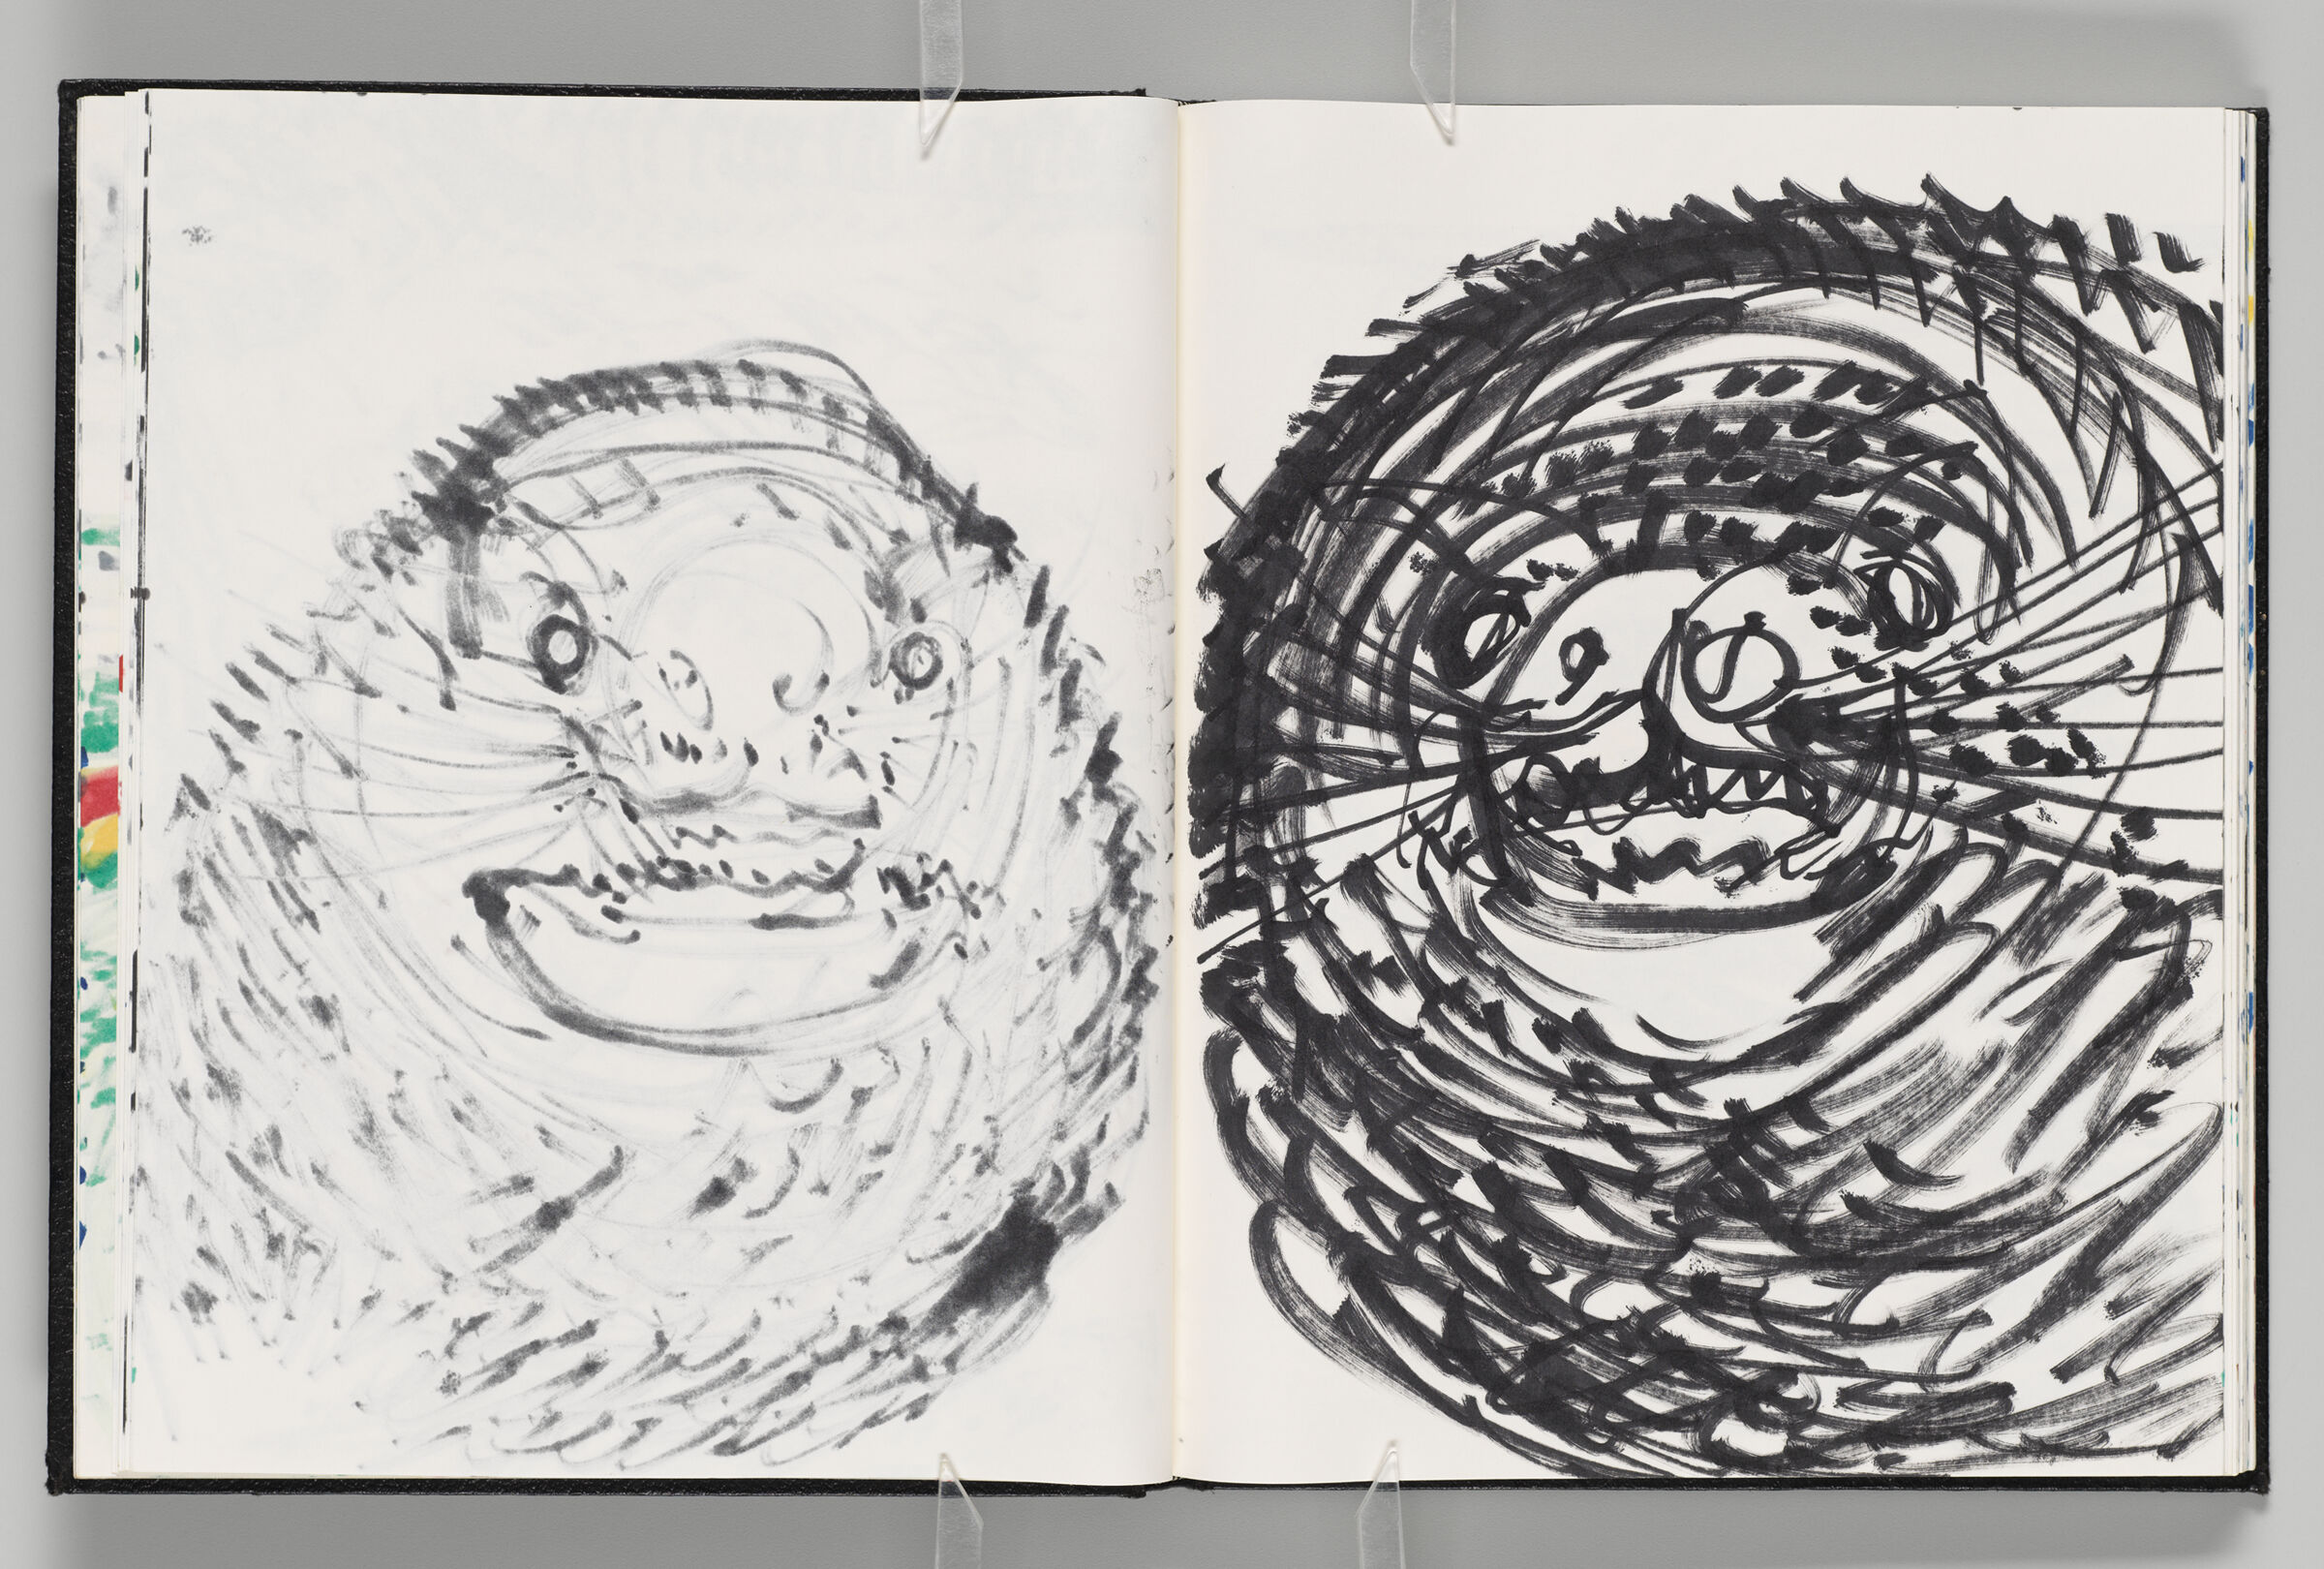 Untitled (Bleed-Through Of Previous Page, Left Page); Untitled (Seal Close-Up, Right Page)